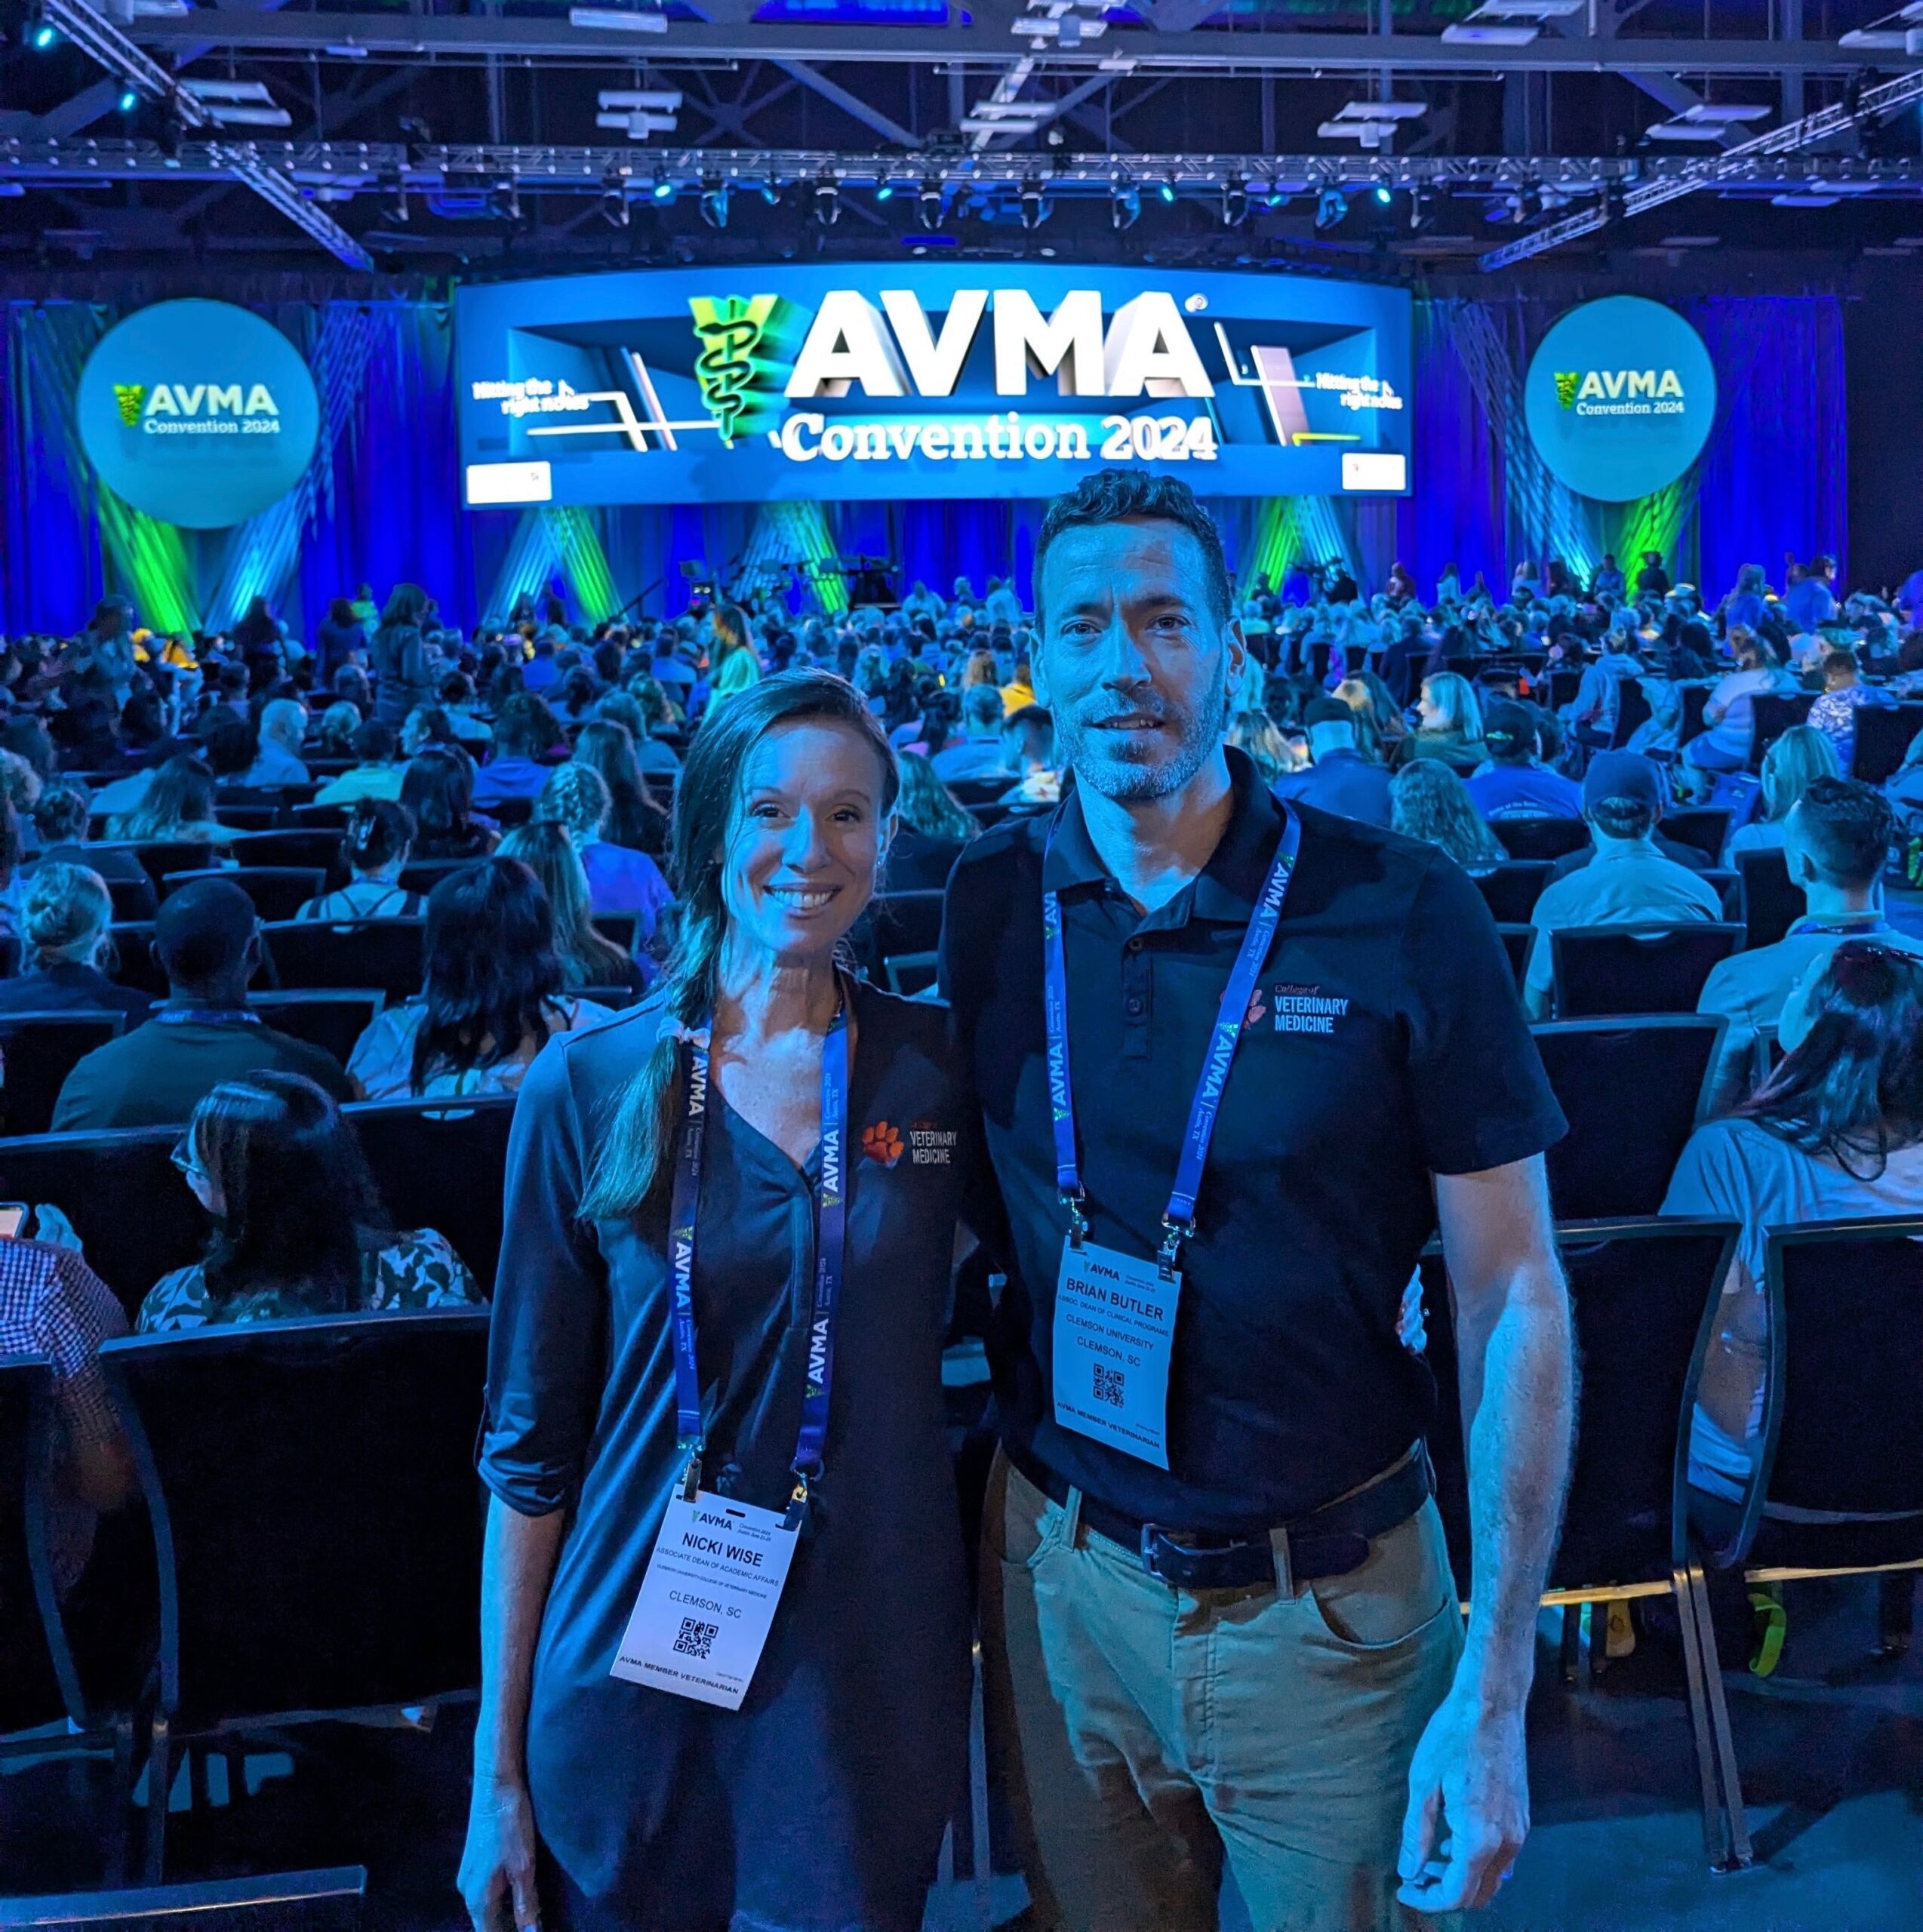 Drs butler and wise attend the AVMA conference